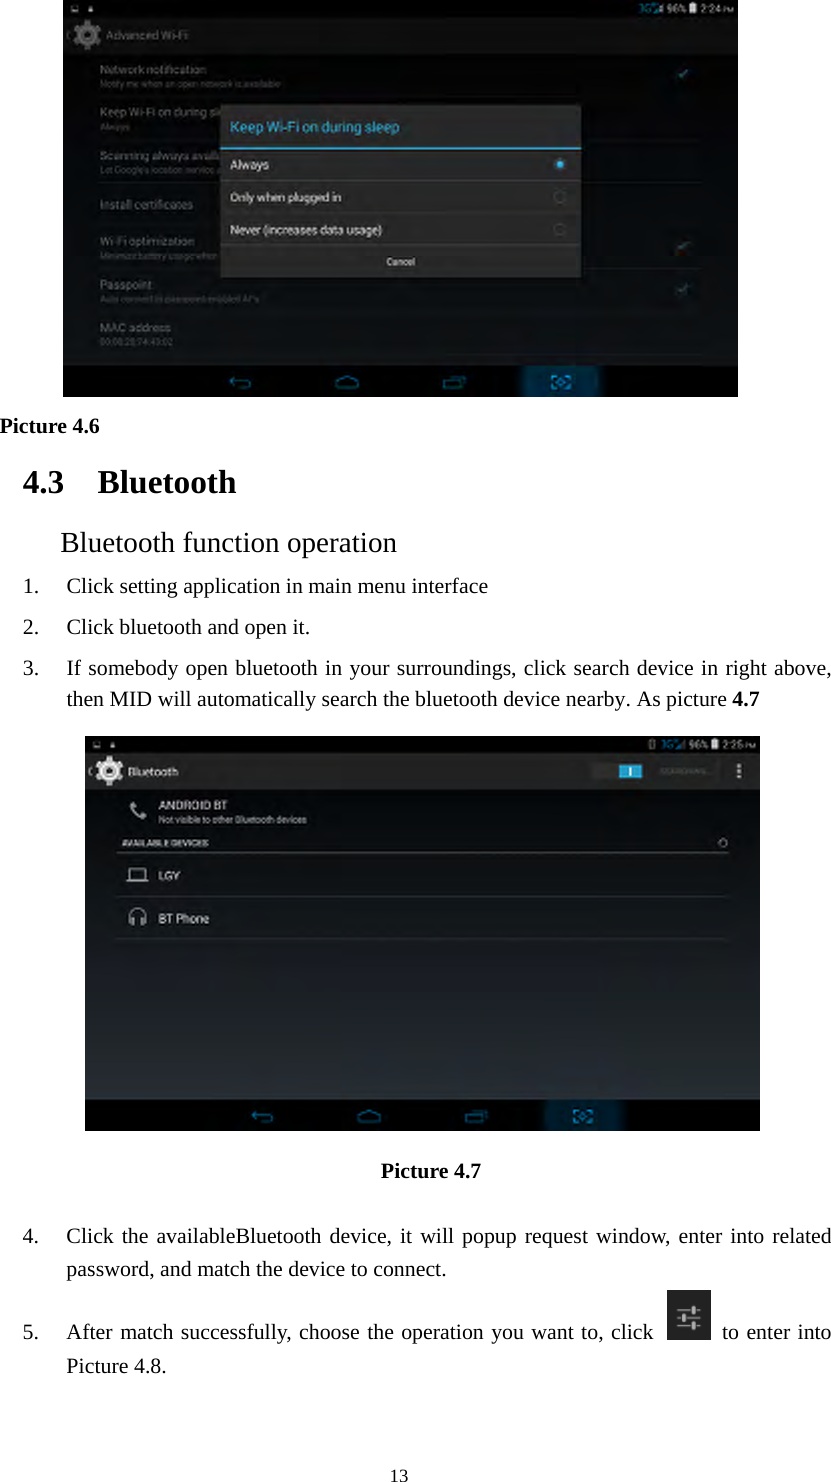  13    Picture 4.6  4.3 Bluetooth Bluetooth function operation 1. Click setting application in main menu interface 2. Click bluetooth and open it.   3. If somebody open bluetooth in your surroundings, click search device in right above, then MID will automatically search the bluetooth device nearby. As picture 4.7  Picture 4.7   4. Click the availableBluetooth device, it will popup request window, enter into related password, and match the device to connect. 5. After match successfully, choose the operation you want to, click    to enter into Picture 4.8. 